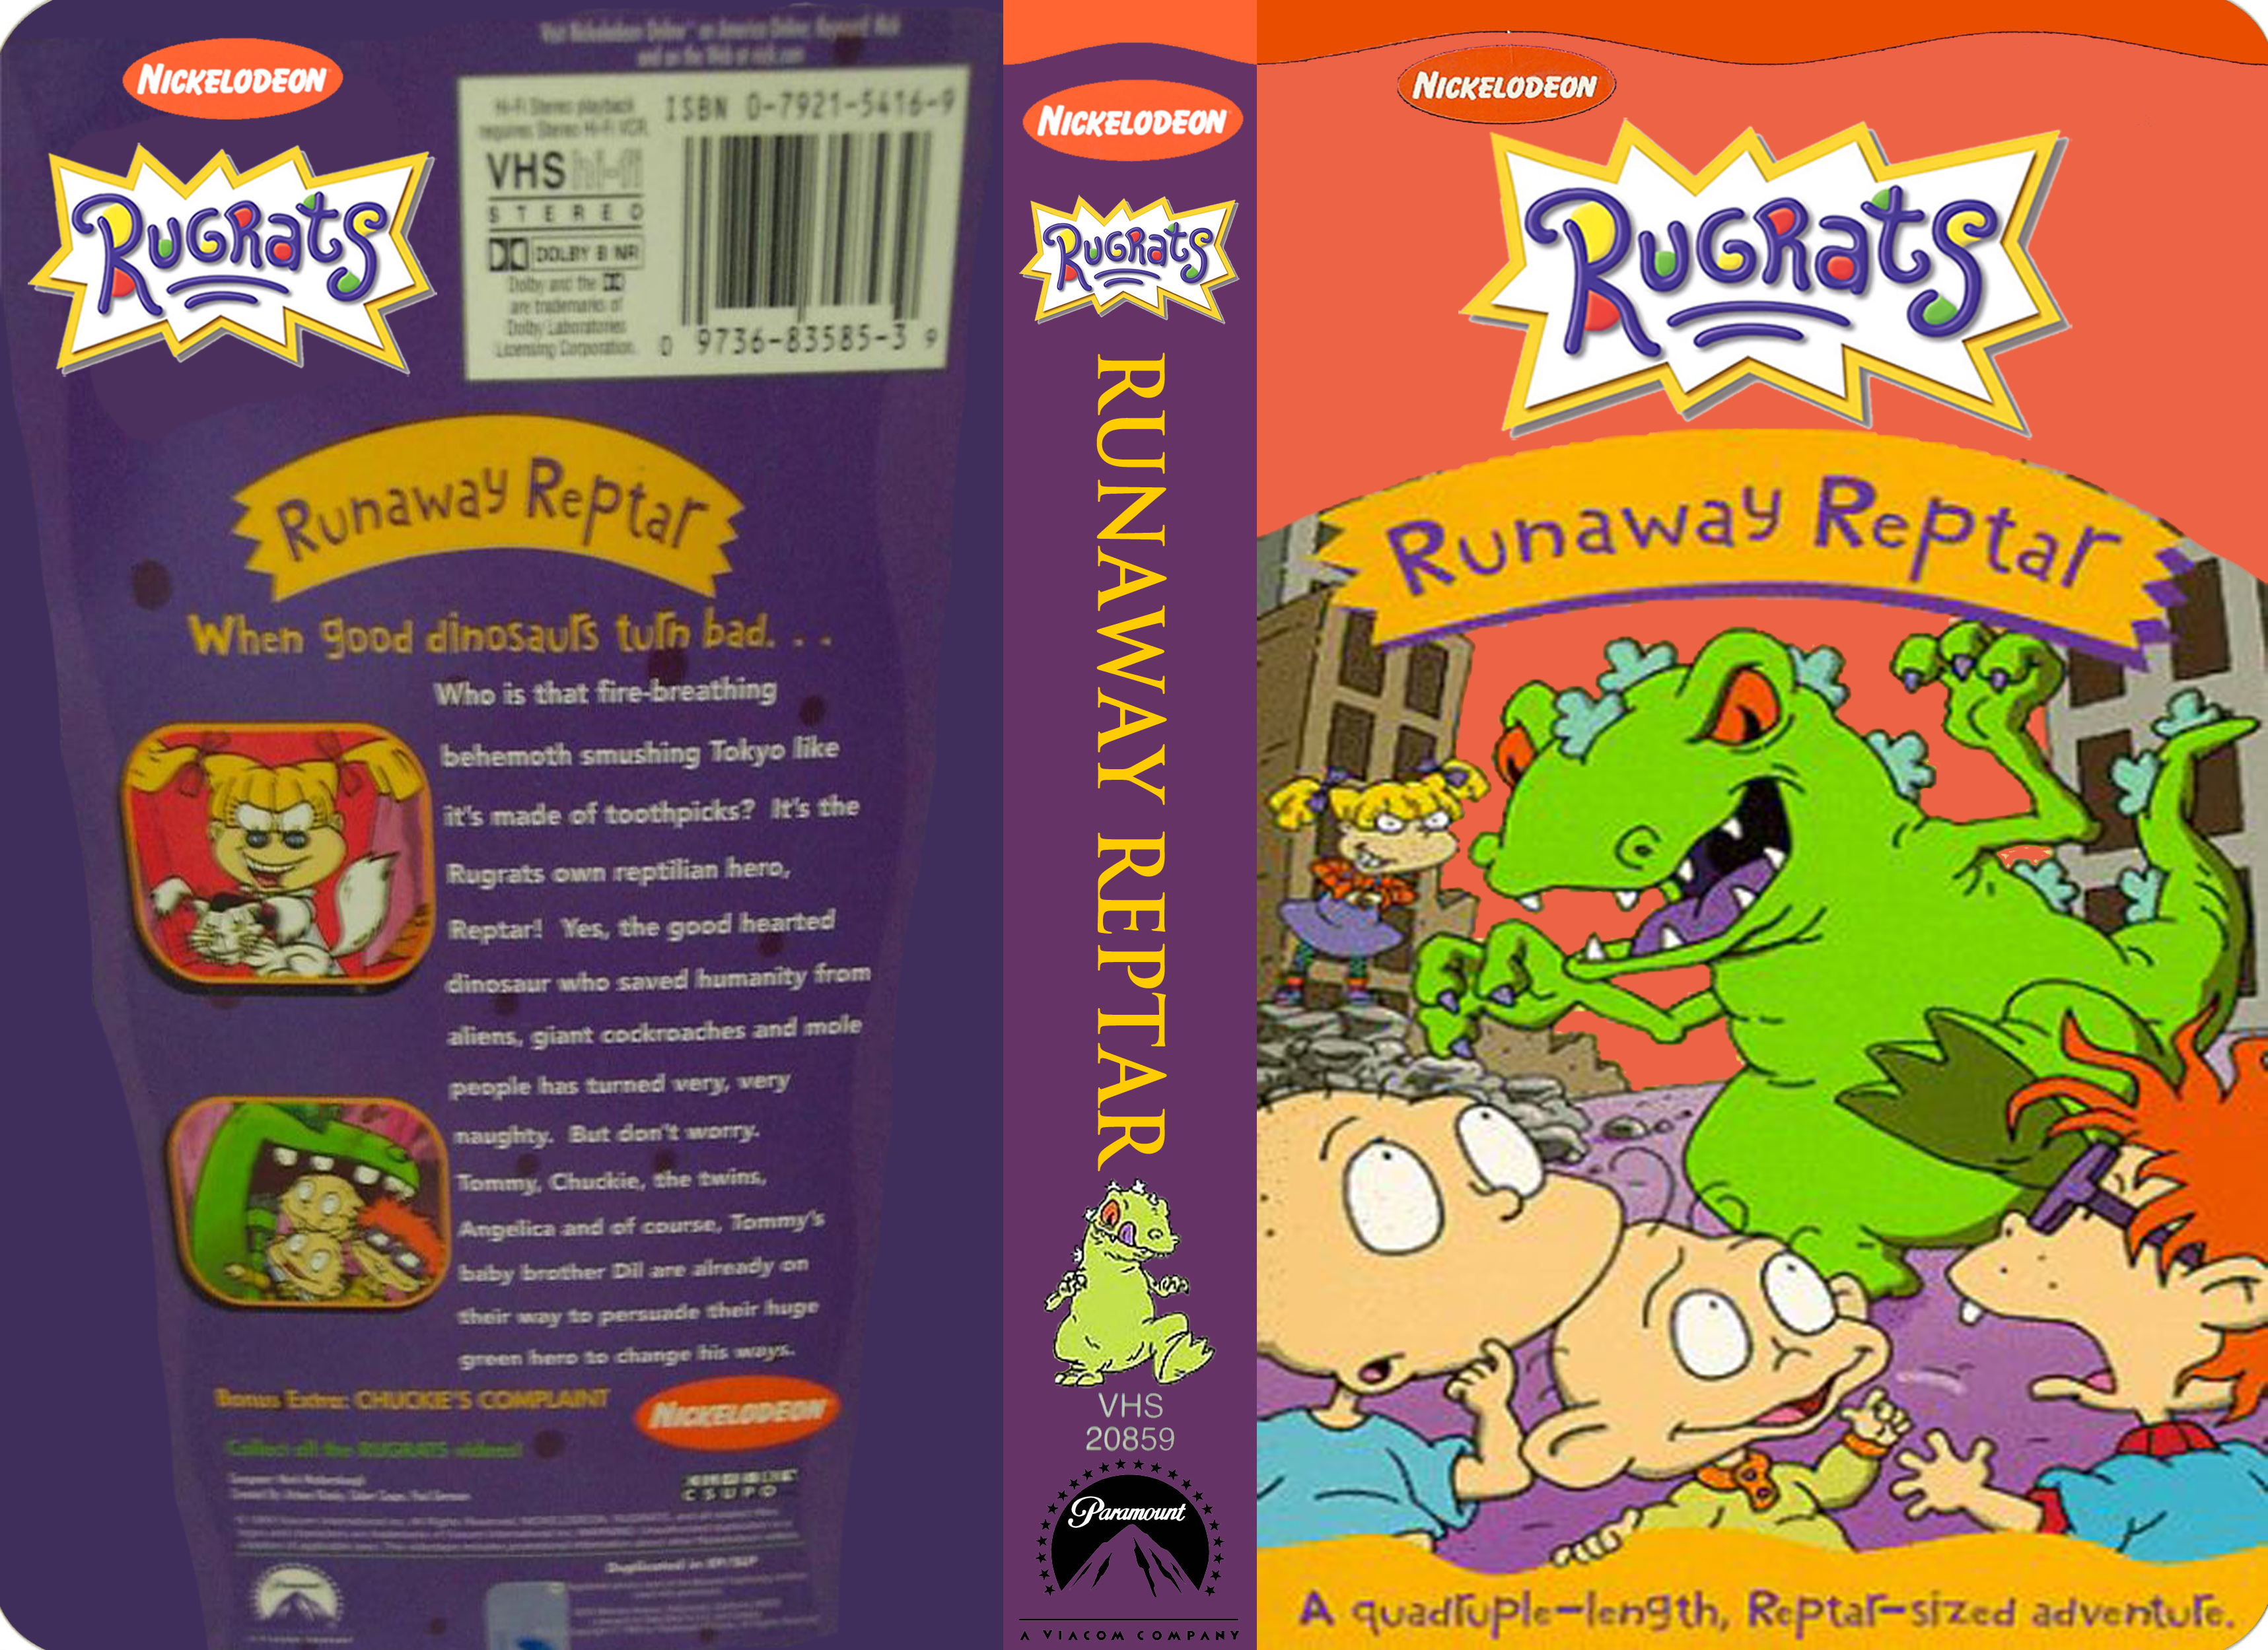 Photo of Nicklodeon's Rugrats Runaway Reptar VHS for fans of Rugrats. 